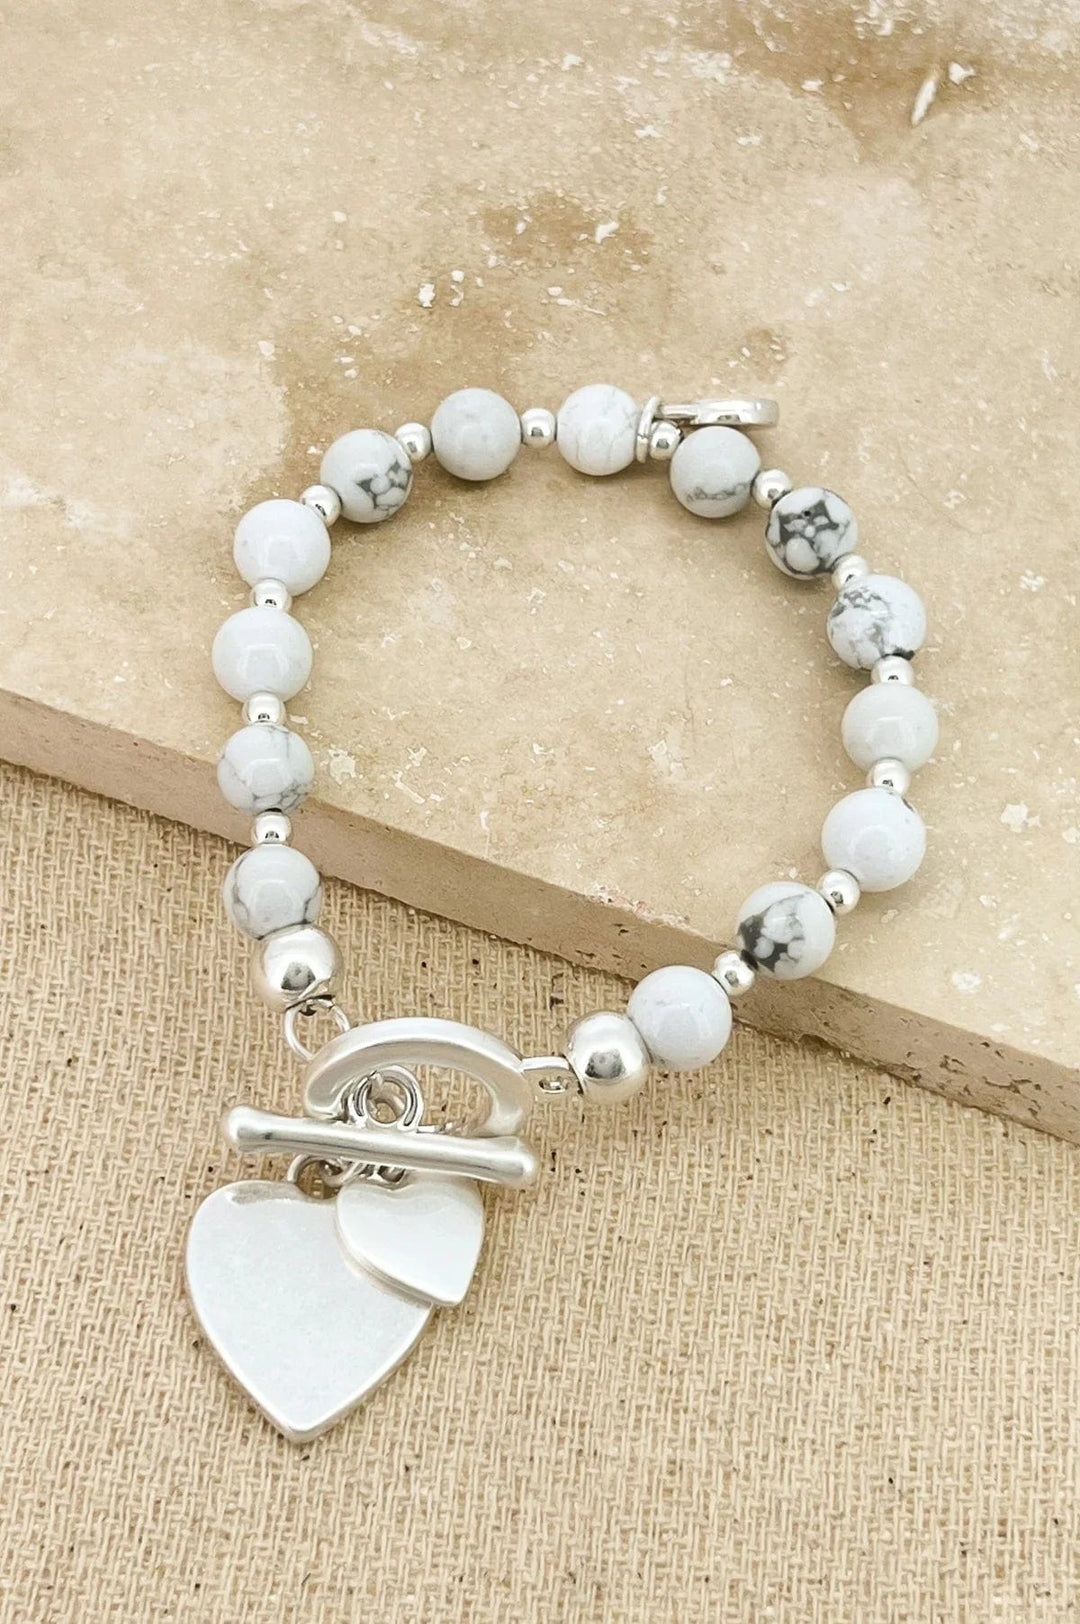 Envy Bracelet With Semi precious beads & heart pendant In white - Crabtree Cottage